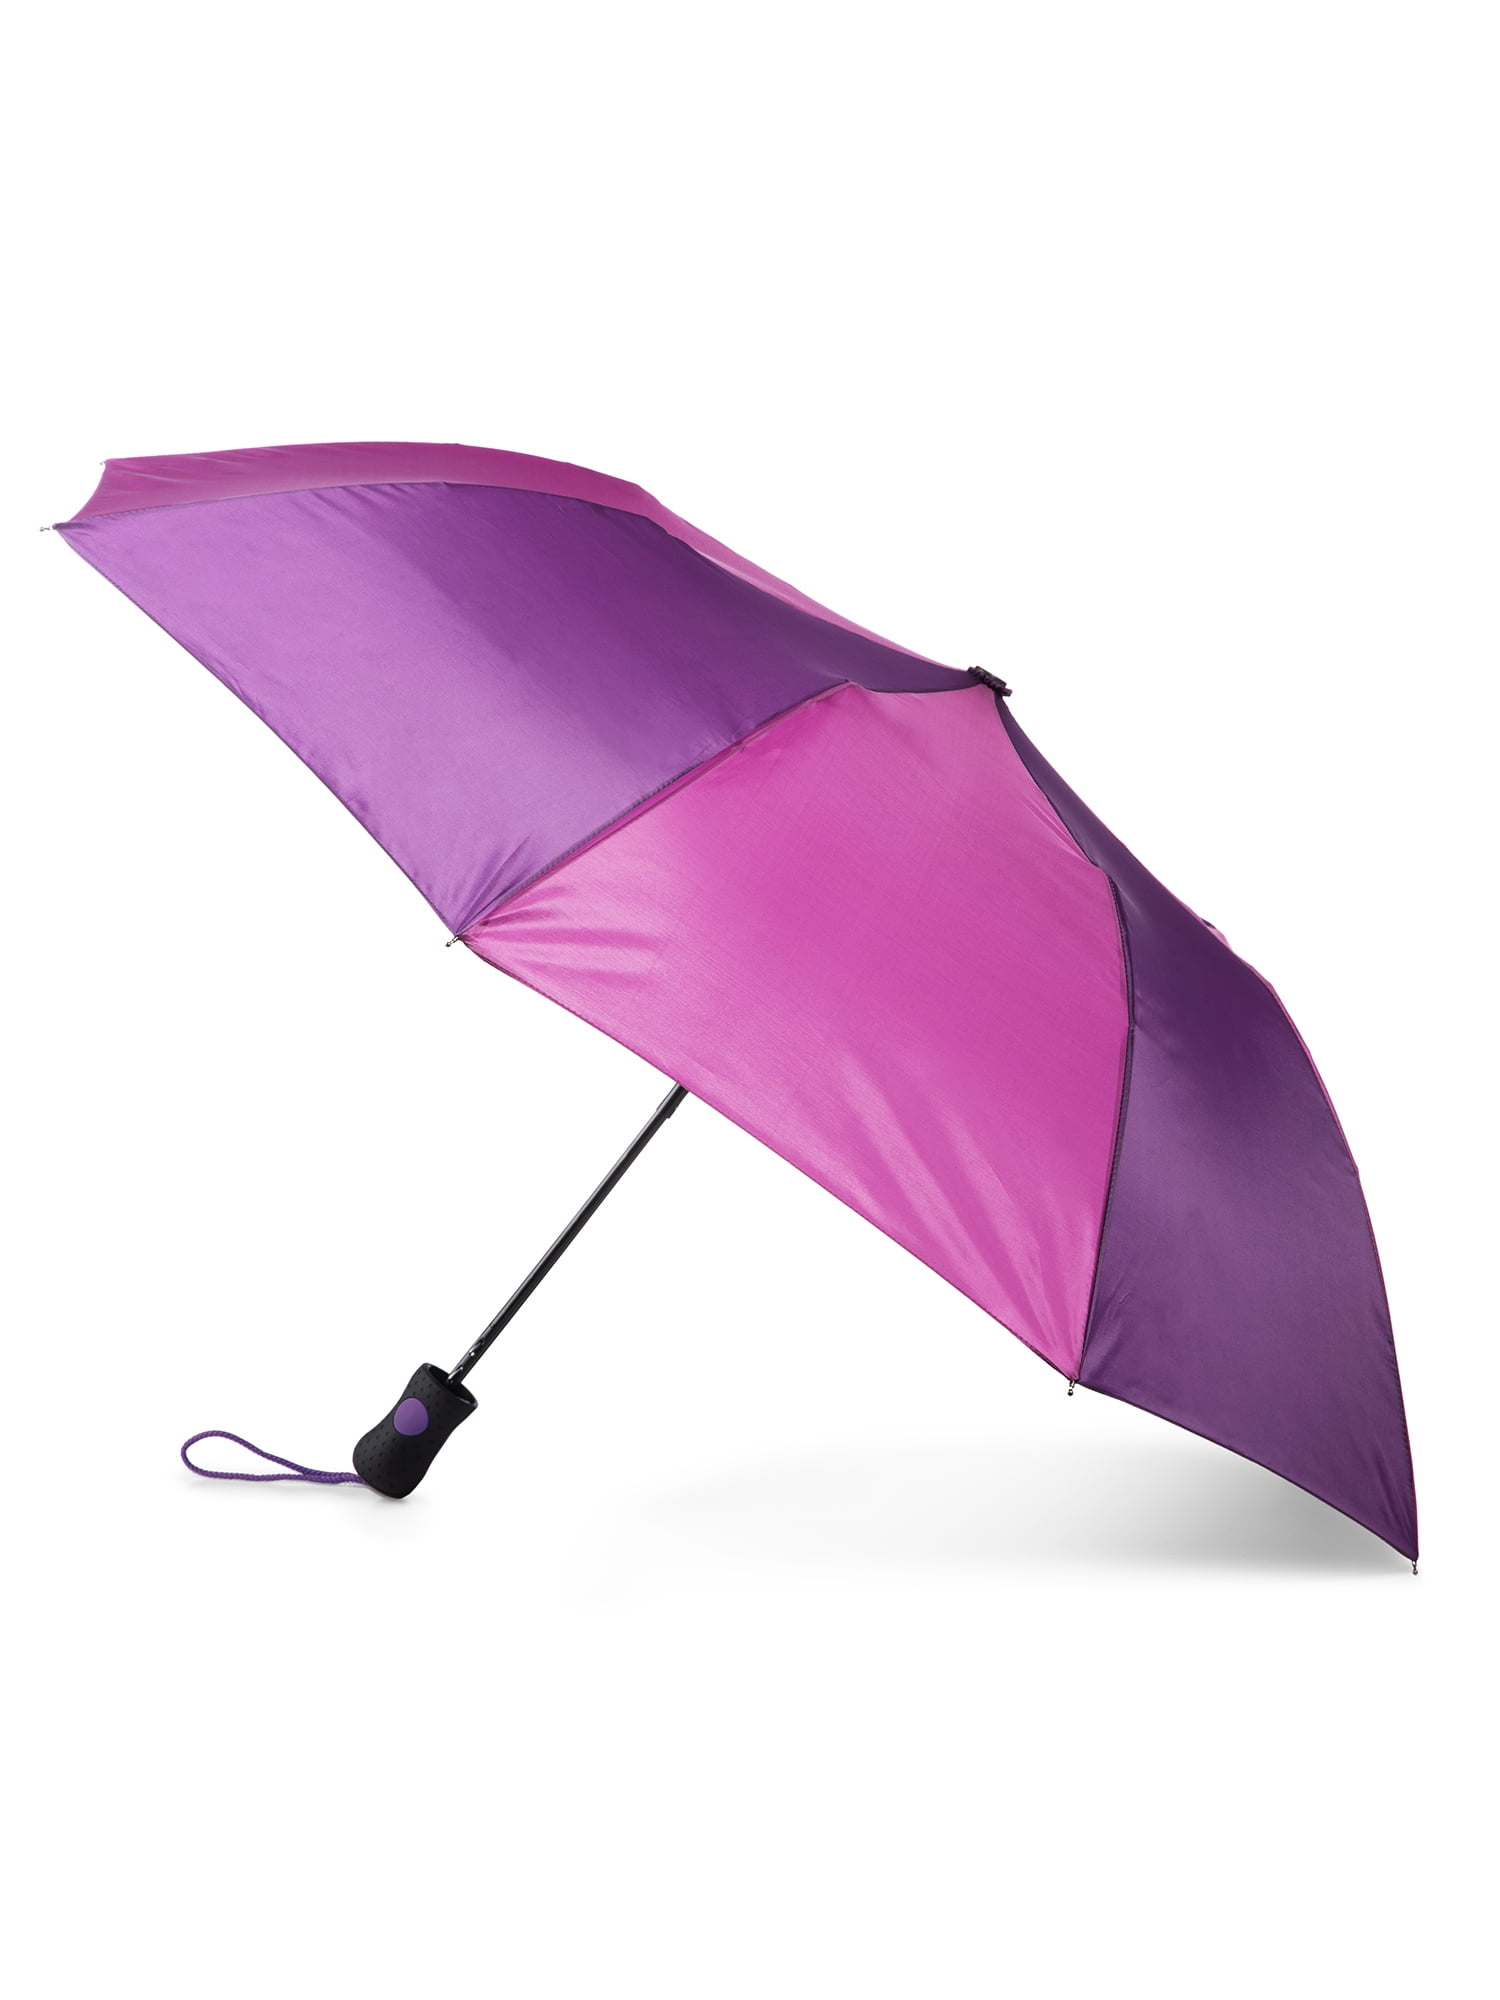 Totes Recycled Canopy Auto Open Umbrella, Adult Unisex, Size: One size, Pink